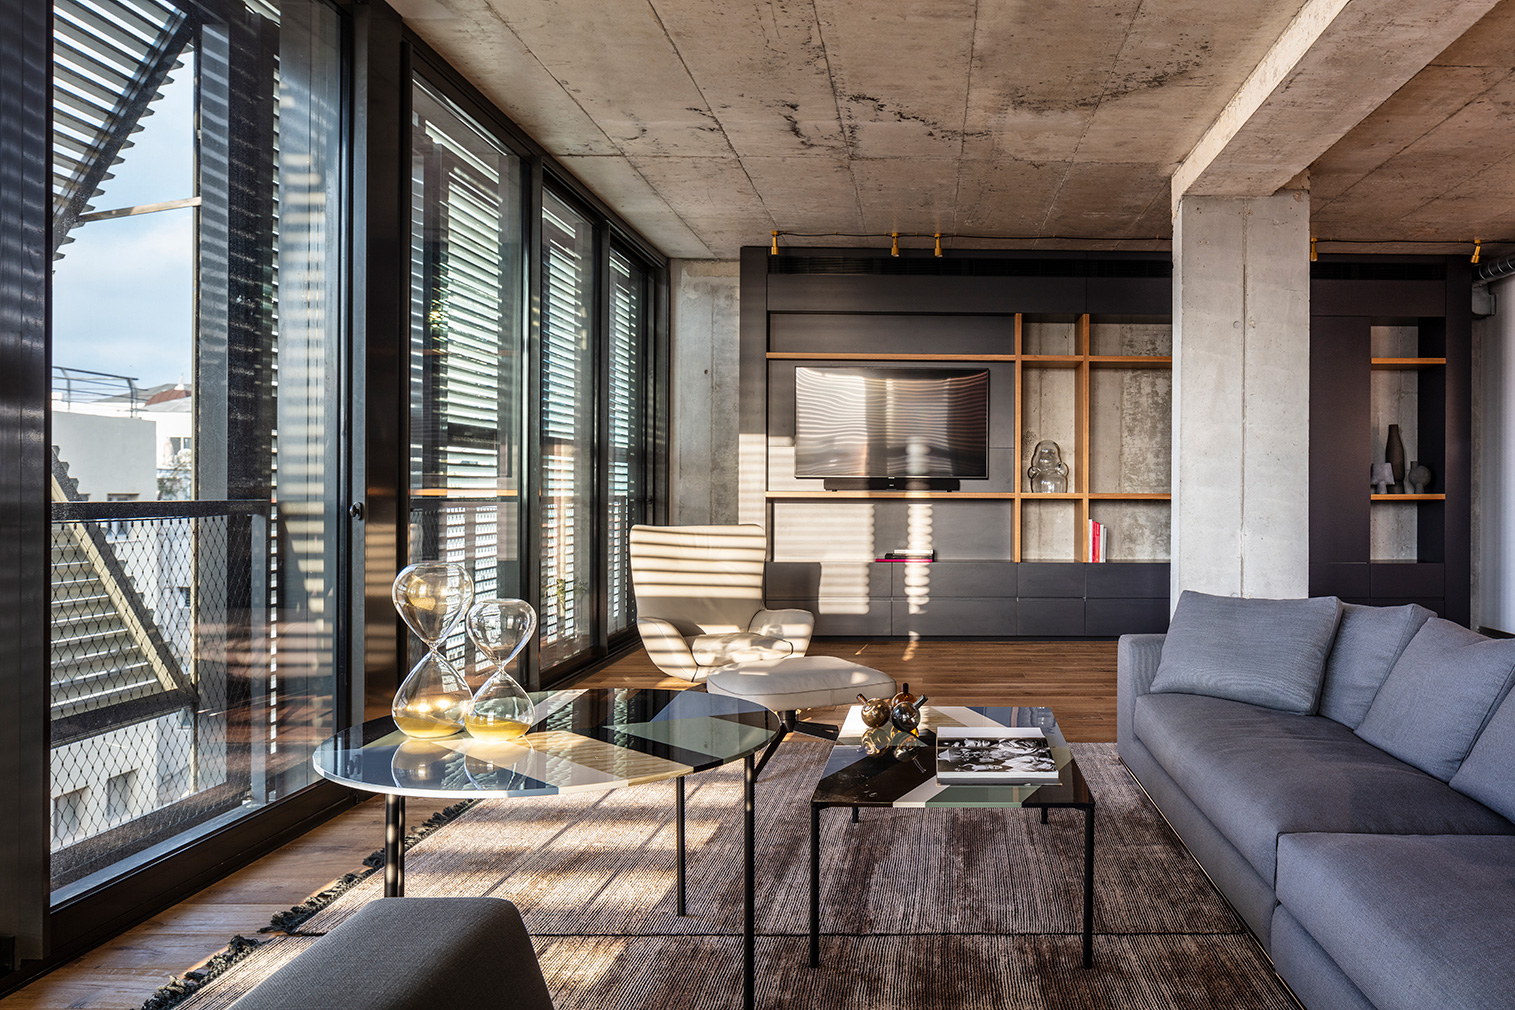 Tel Aviv hotel The Levee blends marries old and new